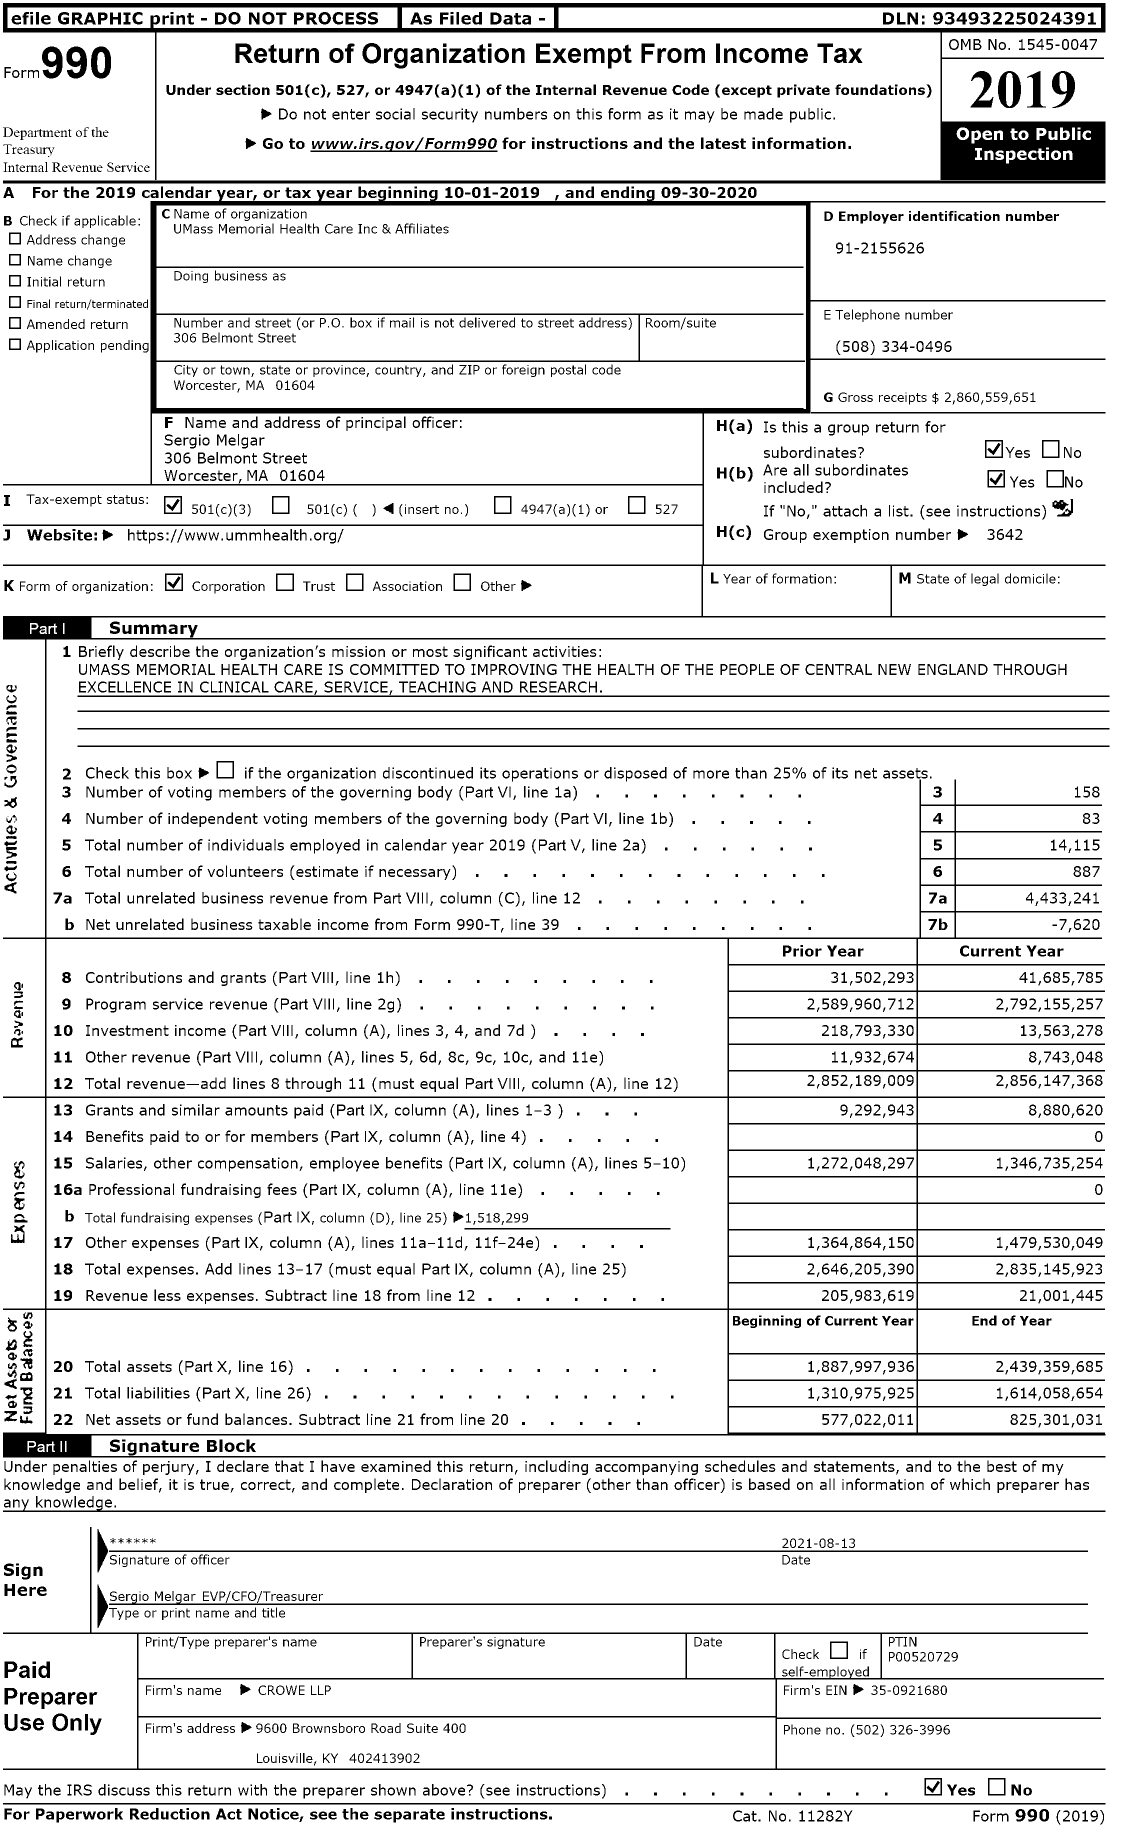 Image of first page of 2019 Form 990 for UMass Memorial Health Care Inc Affiliates